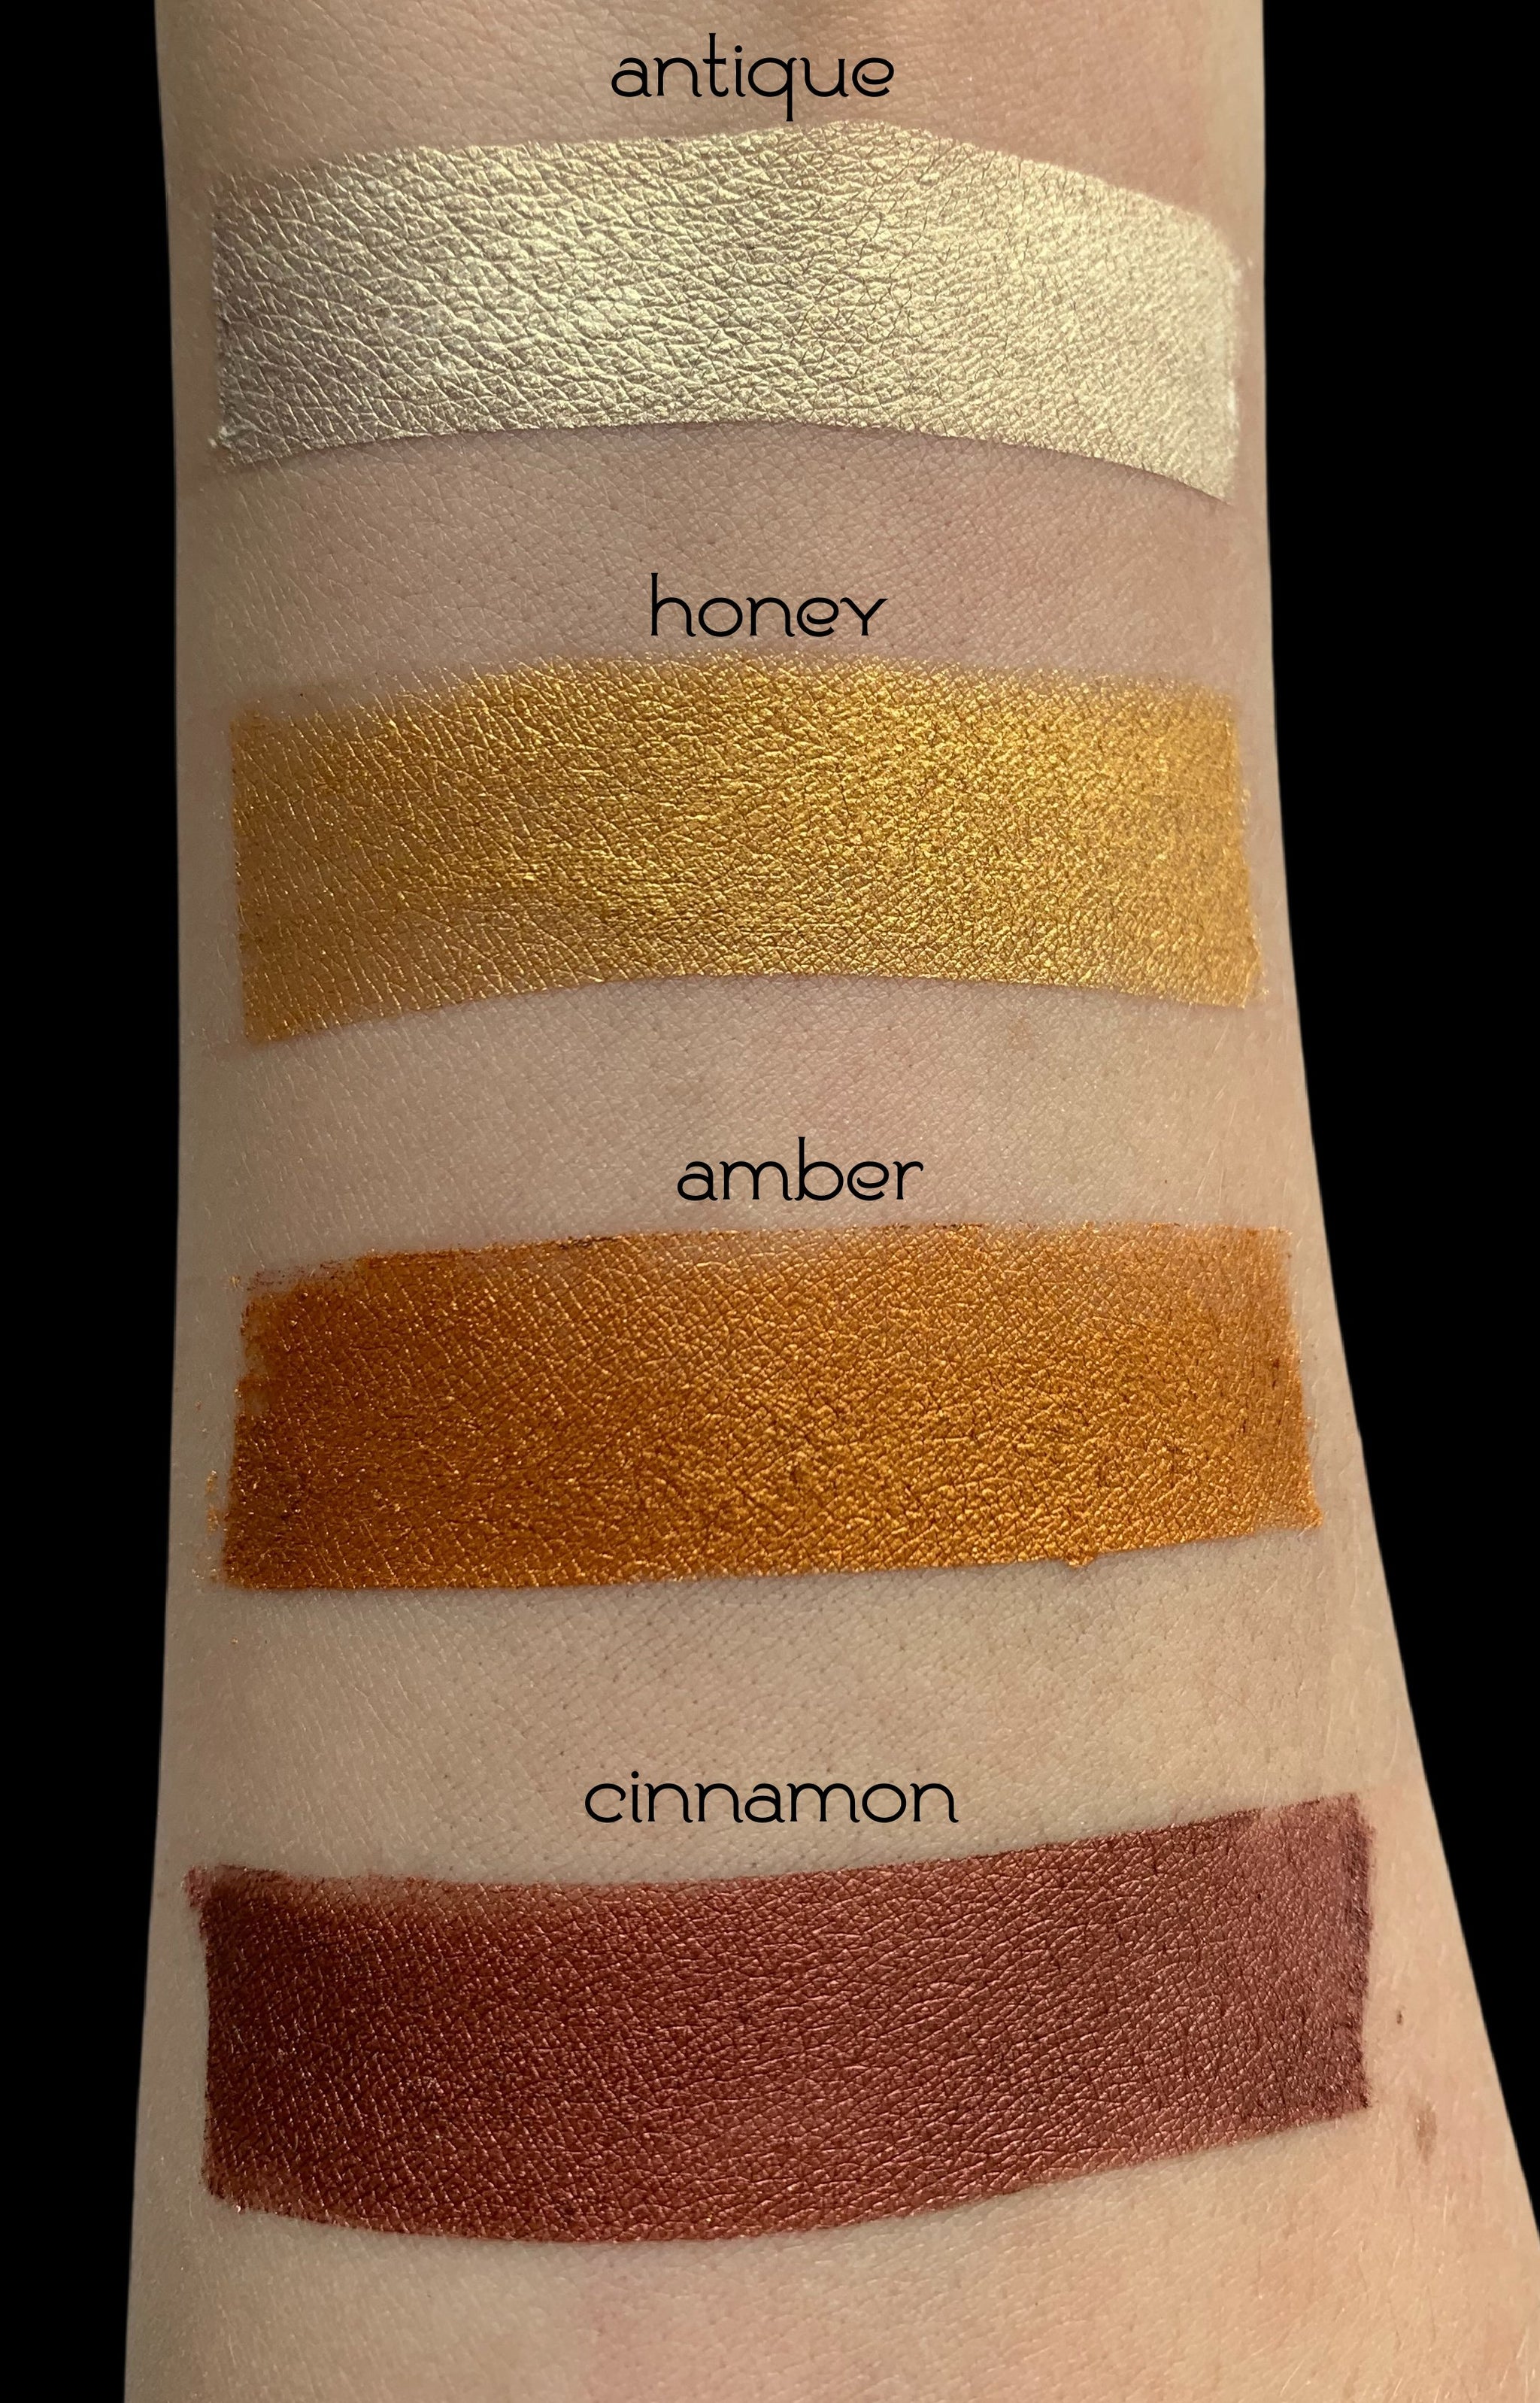 arm showing color swatches of loose eyeshadow in shades of browns - antique, honey, amber and cinnamon.